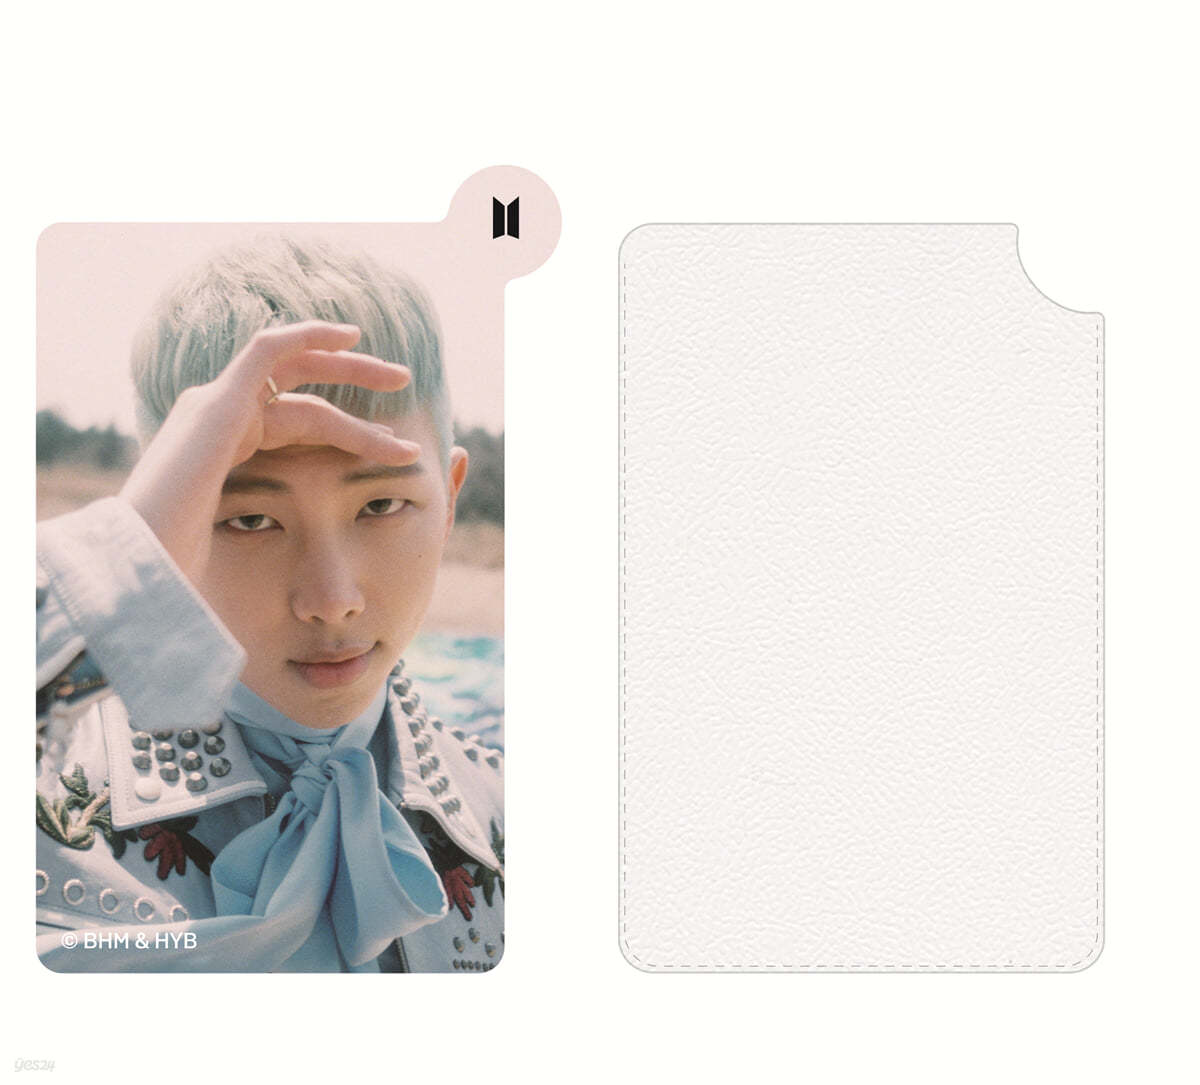 [BTS - 화양연화 Young Forever] LENTI HAND MIRROR [RM ver.]